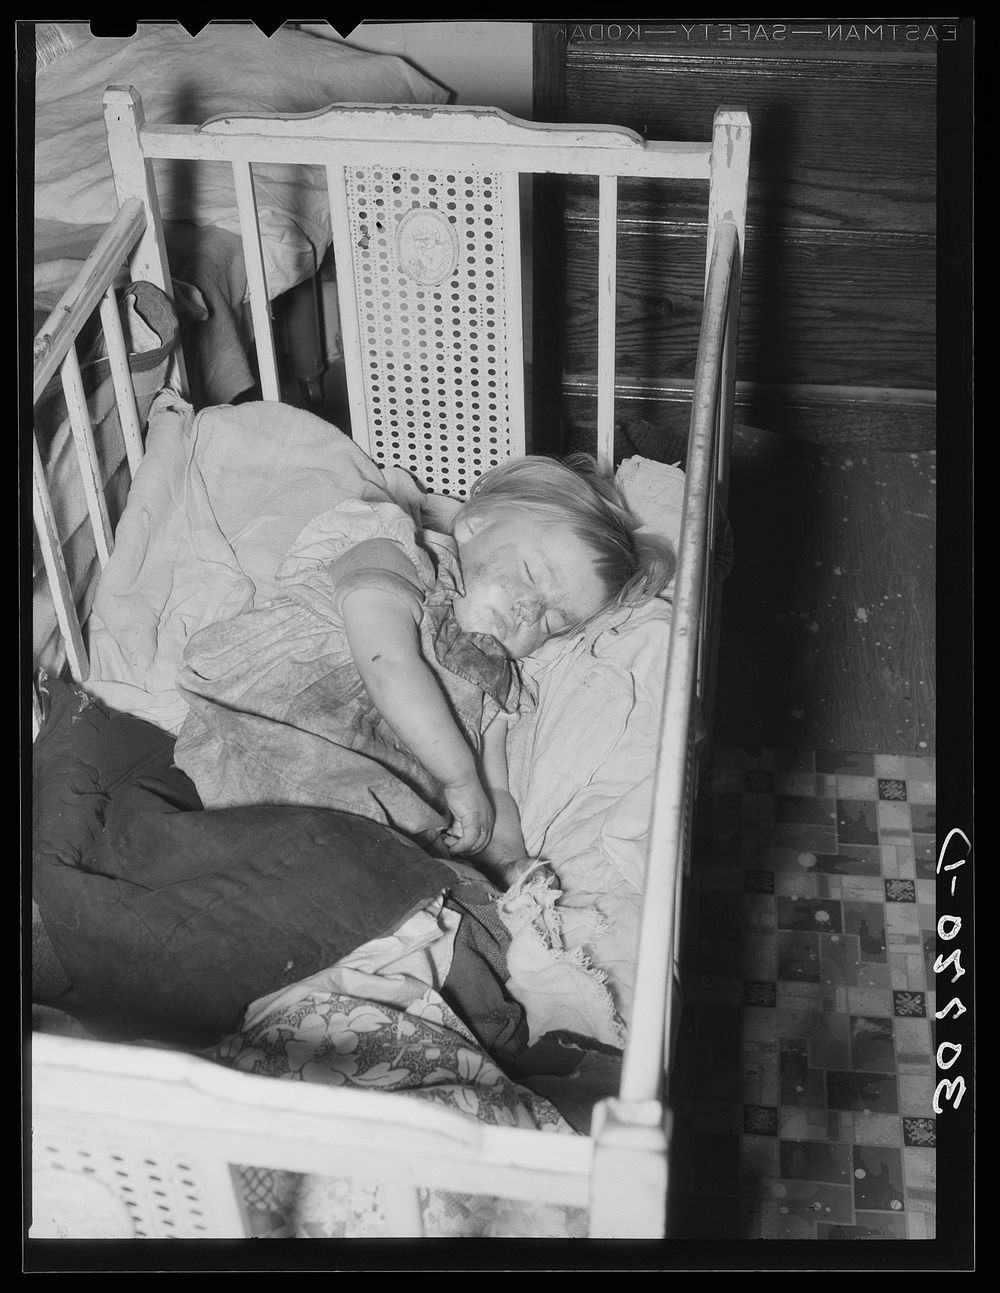 Sleeping child in farm home. Williams County, North Dakota by Russell Lee